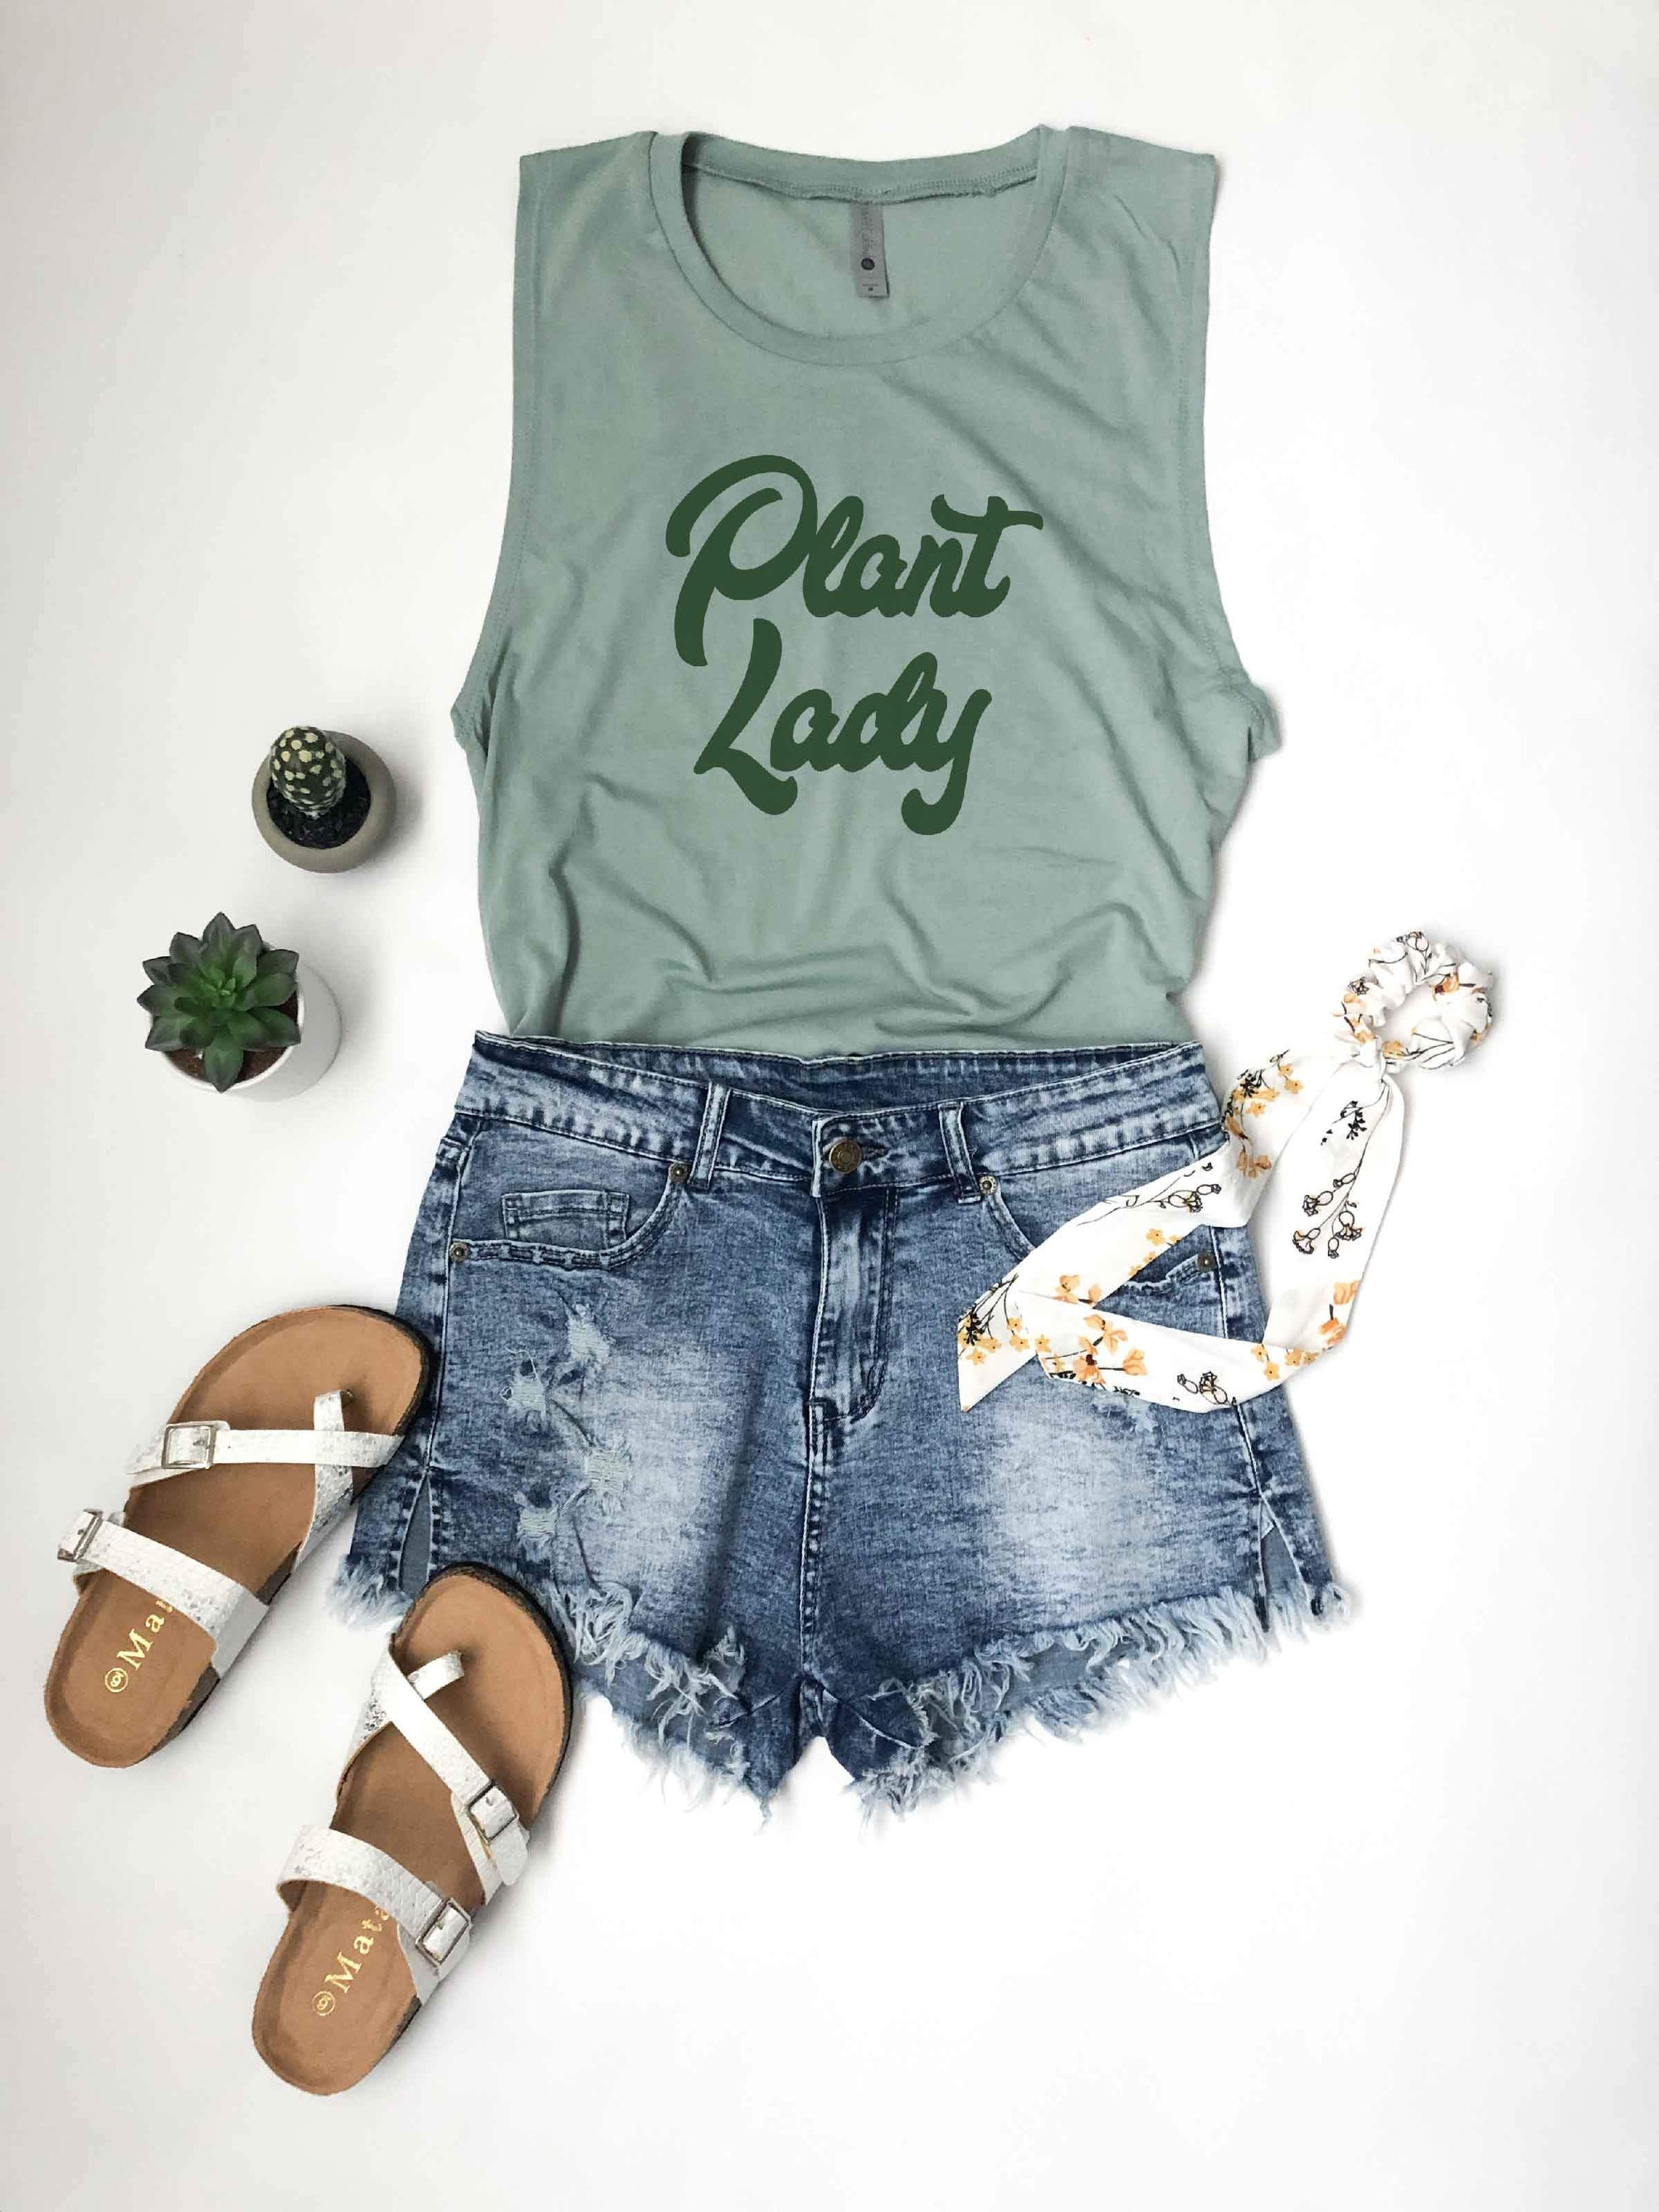 Plant lady unisex muscle tank Short sleeve miscellaneous tee Next level sage green unisex muscle tank 